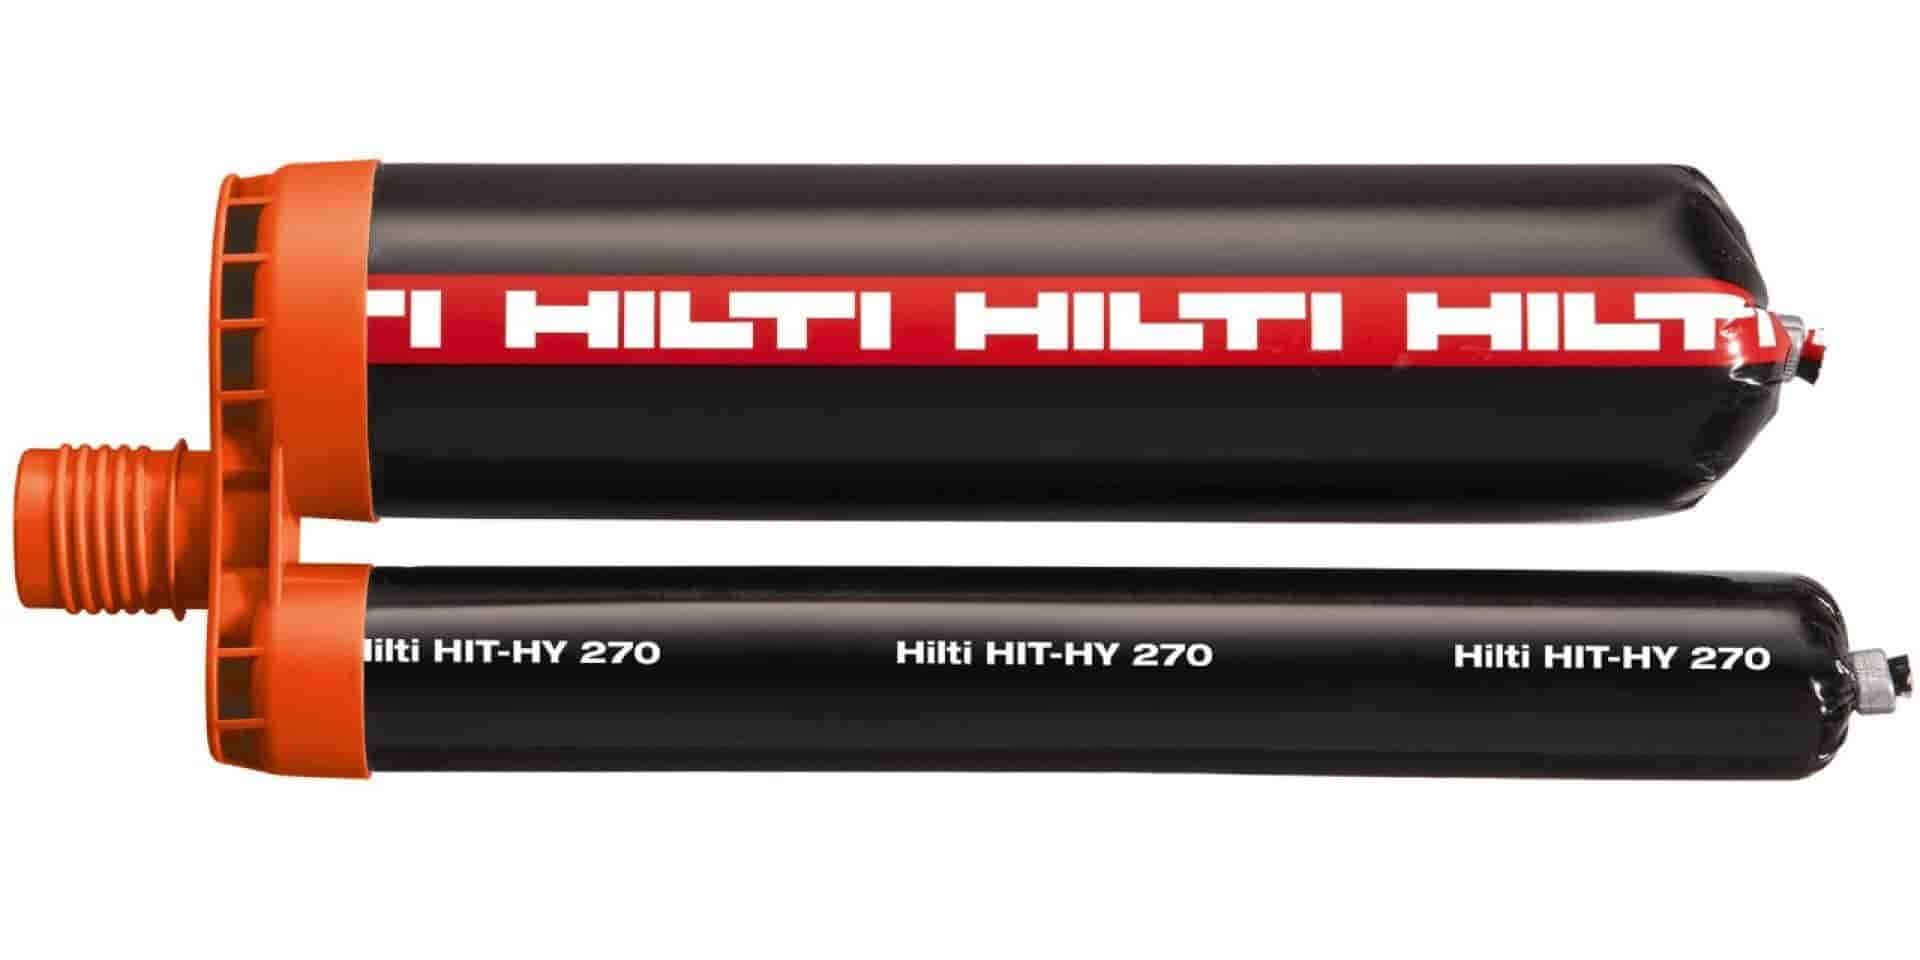 Hilti injectable mortar HIT-HY 270